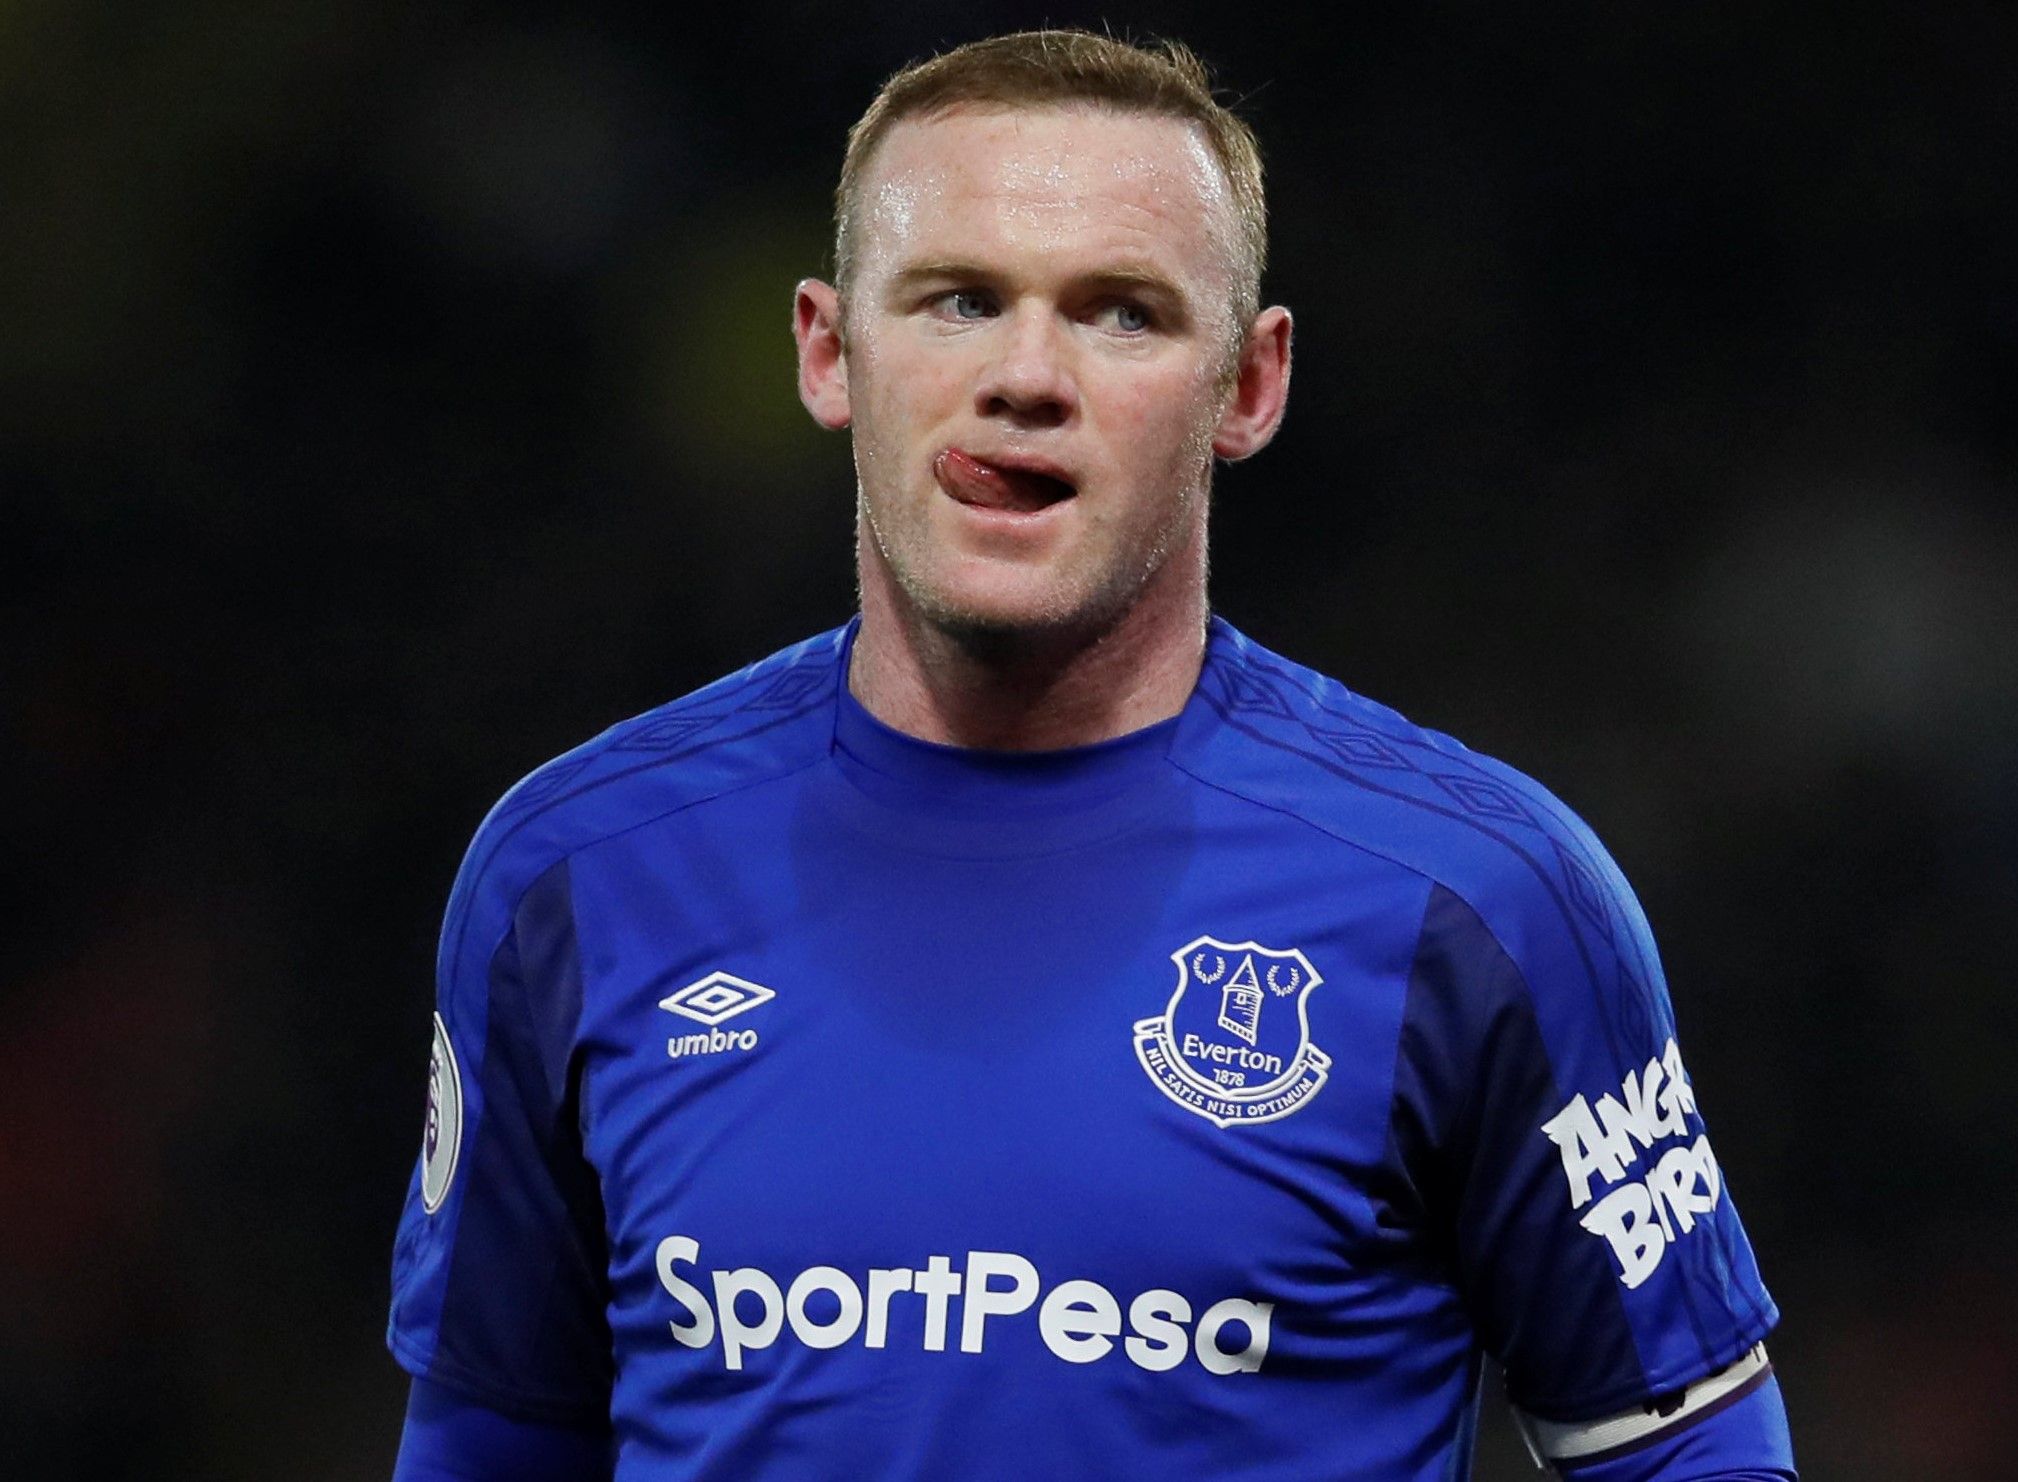 Soccer Football - Premier League - Watford vs Everton - Vicarage Road, Watford, Britain - February 24, 2018   Everton's Wayne Rooney               REUTERS/David Klein    EDITORIAL USE ONLY. No use with unauthorized audio, video, data, fixture lists, club/league logos or 